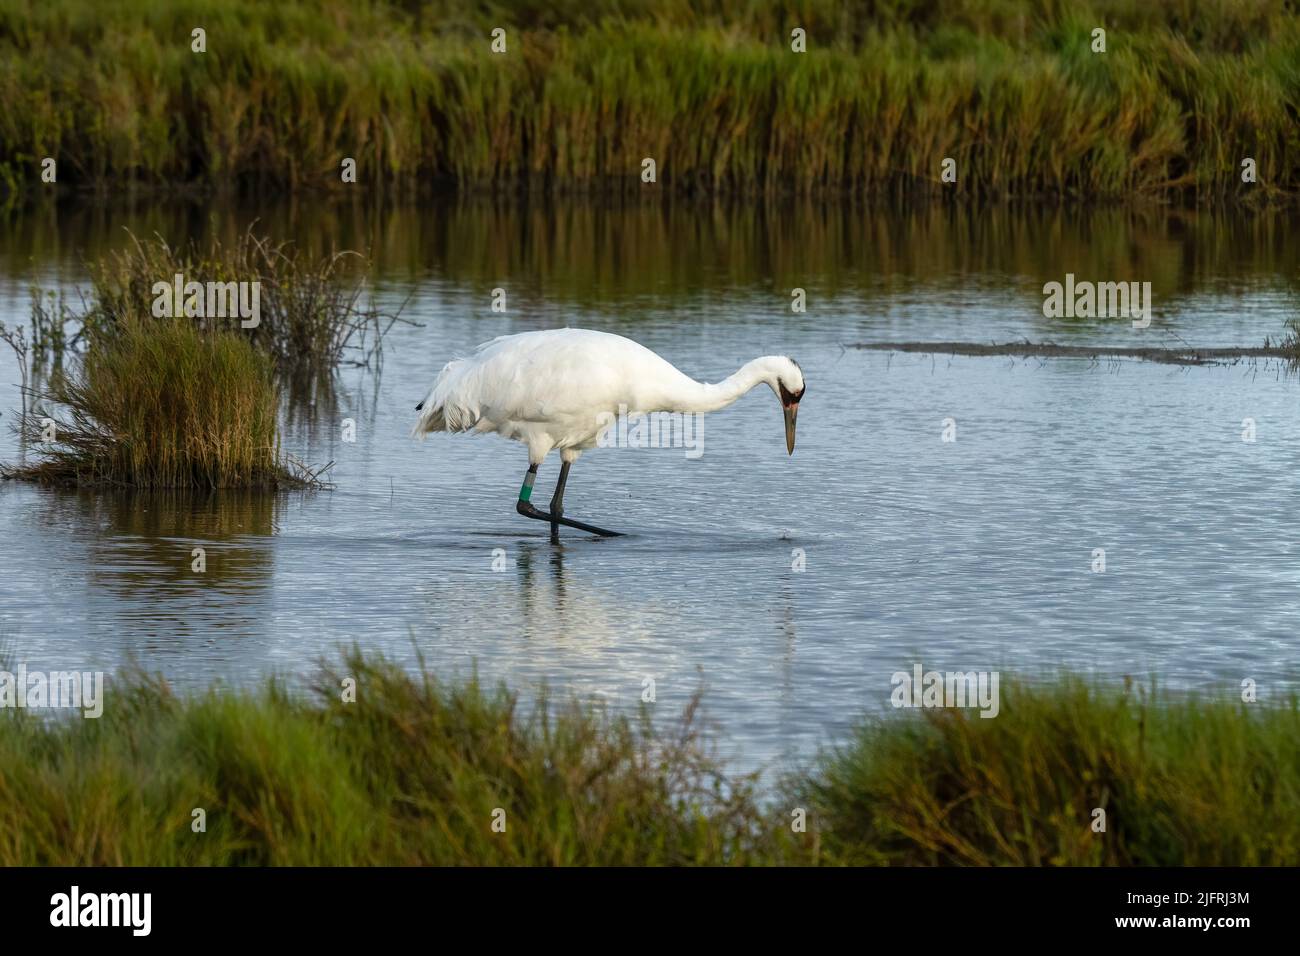 An adult Whooping Crane, Grus americana, hunting for crabs in a saltwater marsh in the Aransas National Wildlife Refuge in Texas. Stock Photo